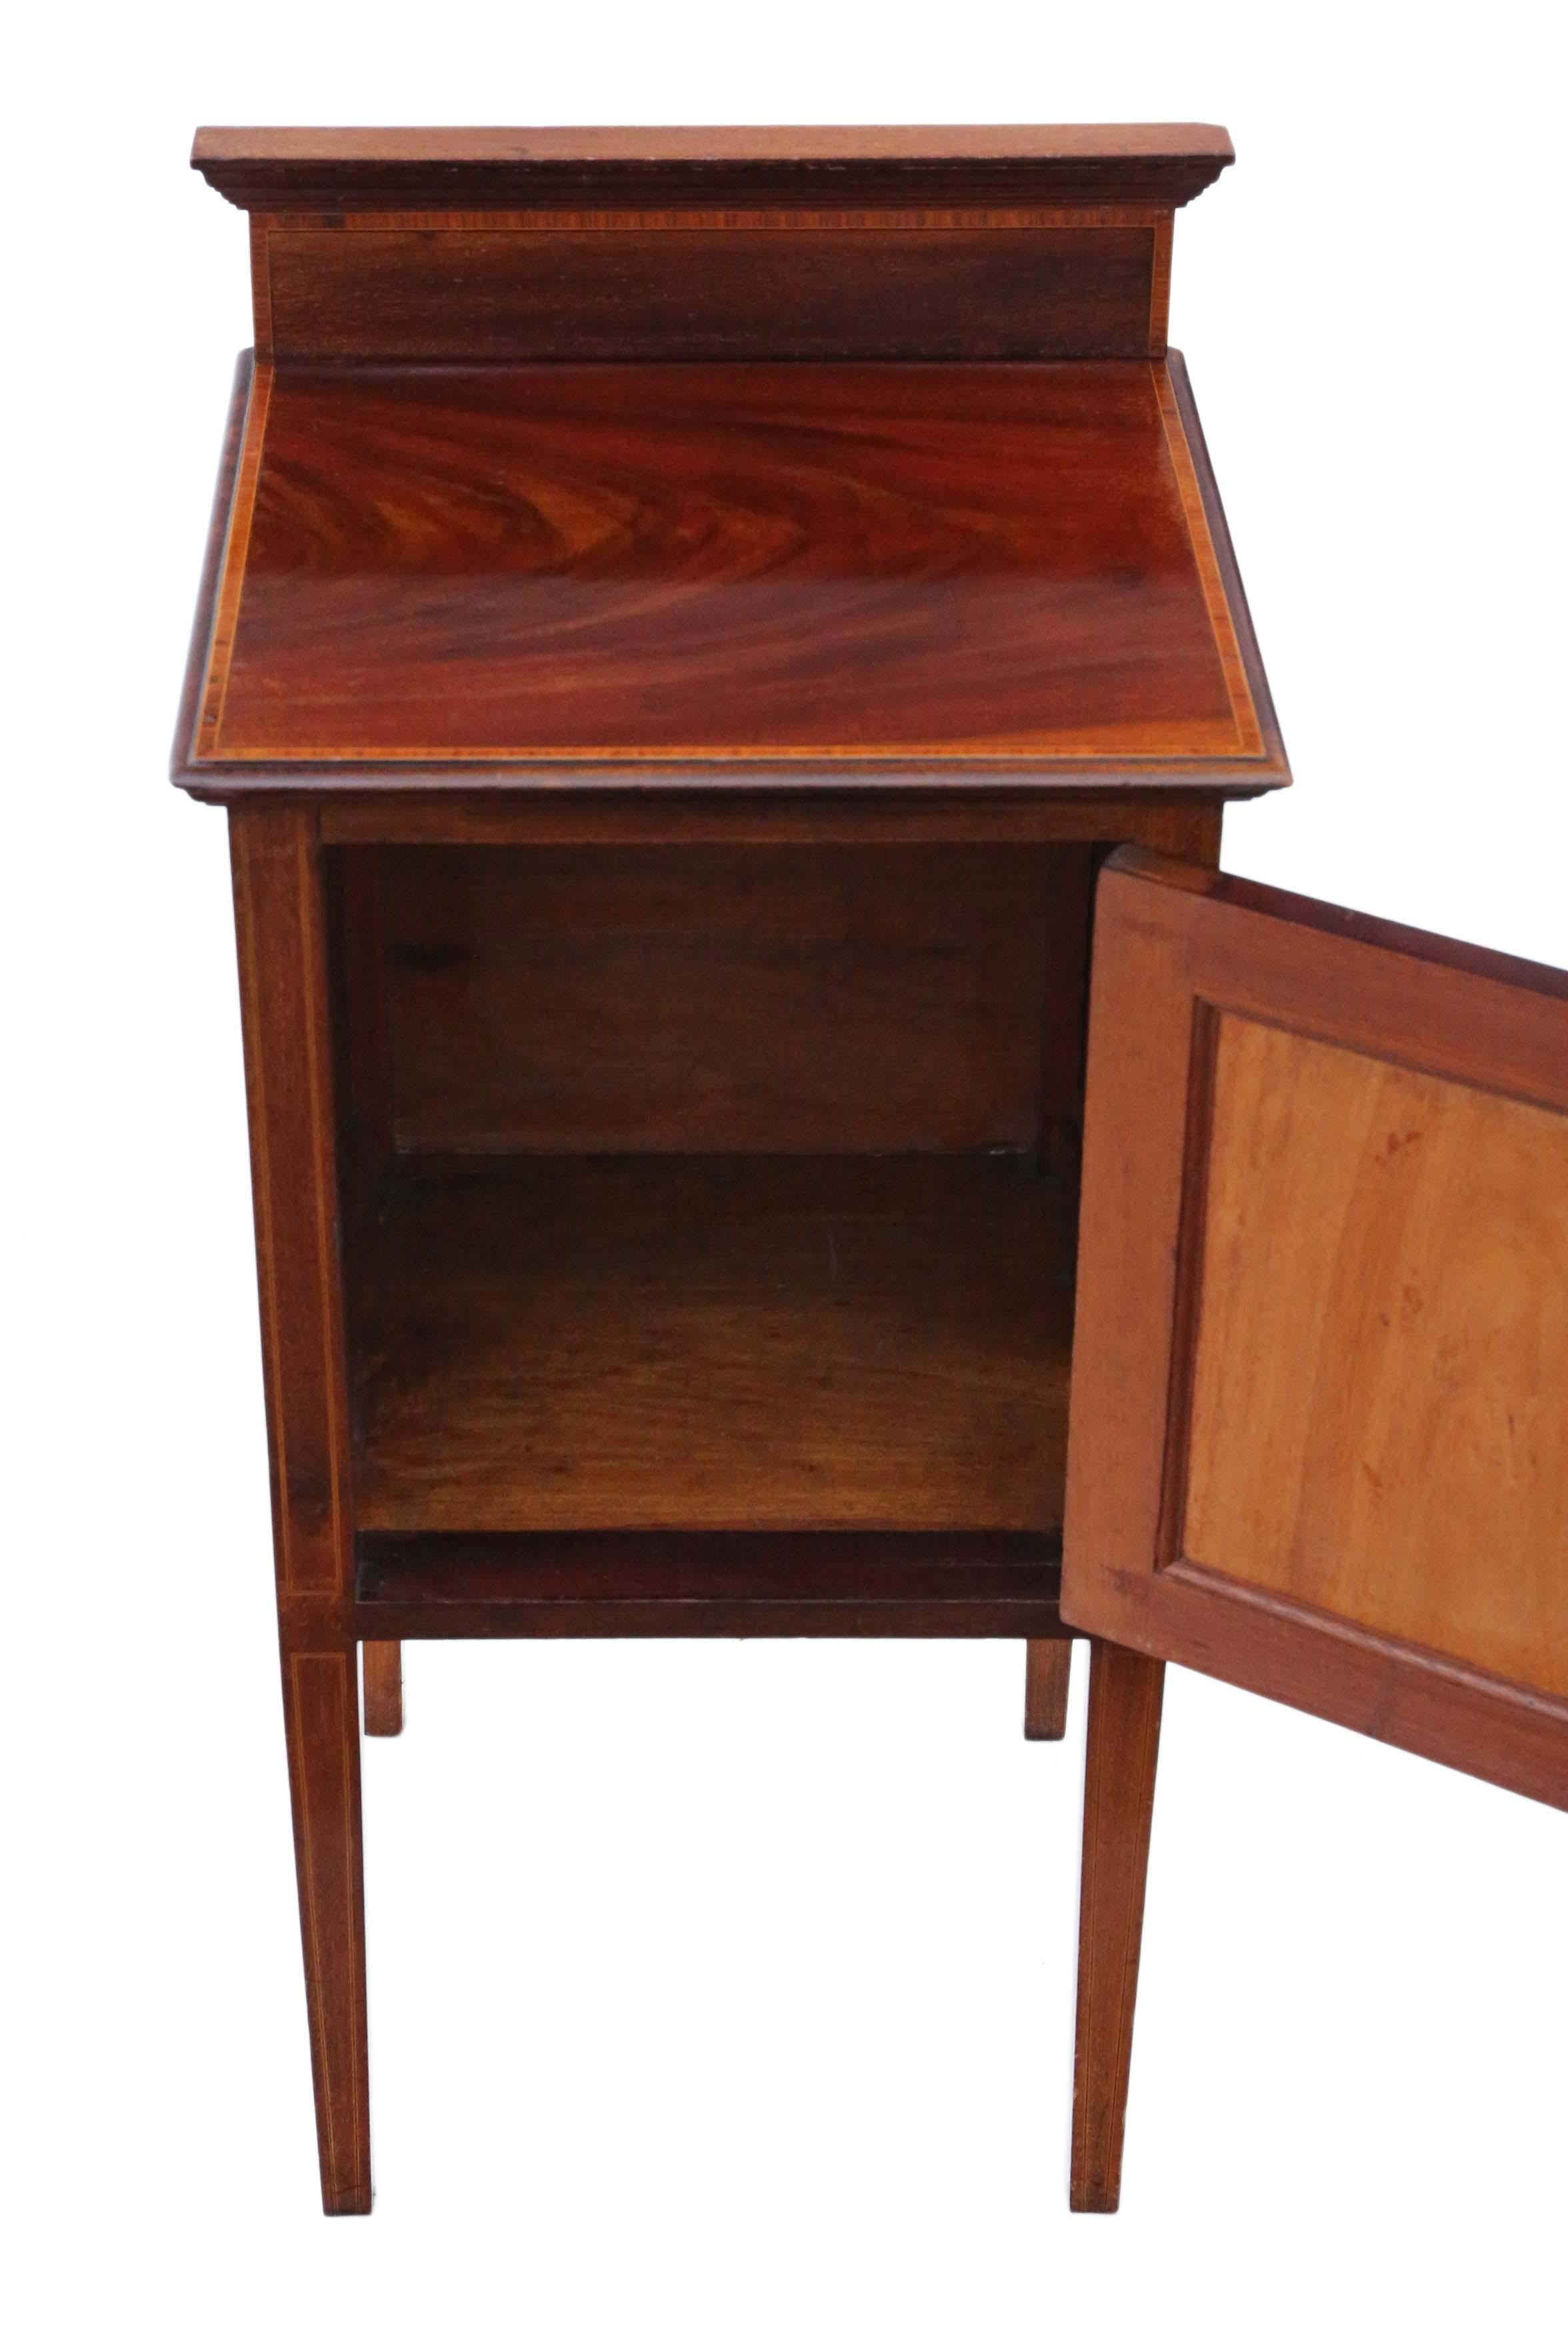 Early 20th Century Antique Edwardian C1910 Inlaid Mahogany Bedside Table Cupboard